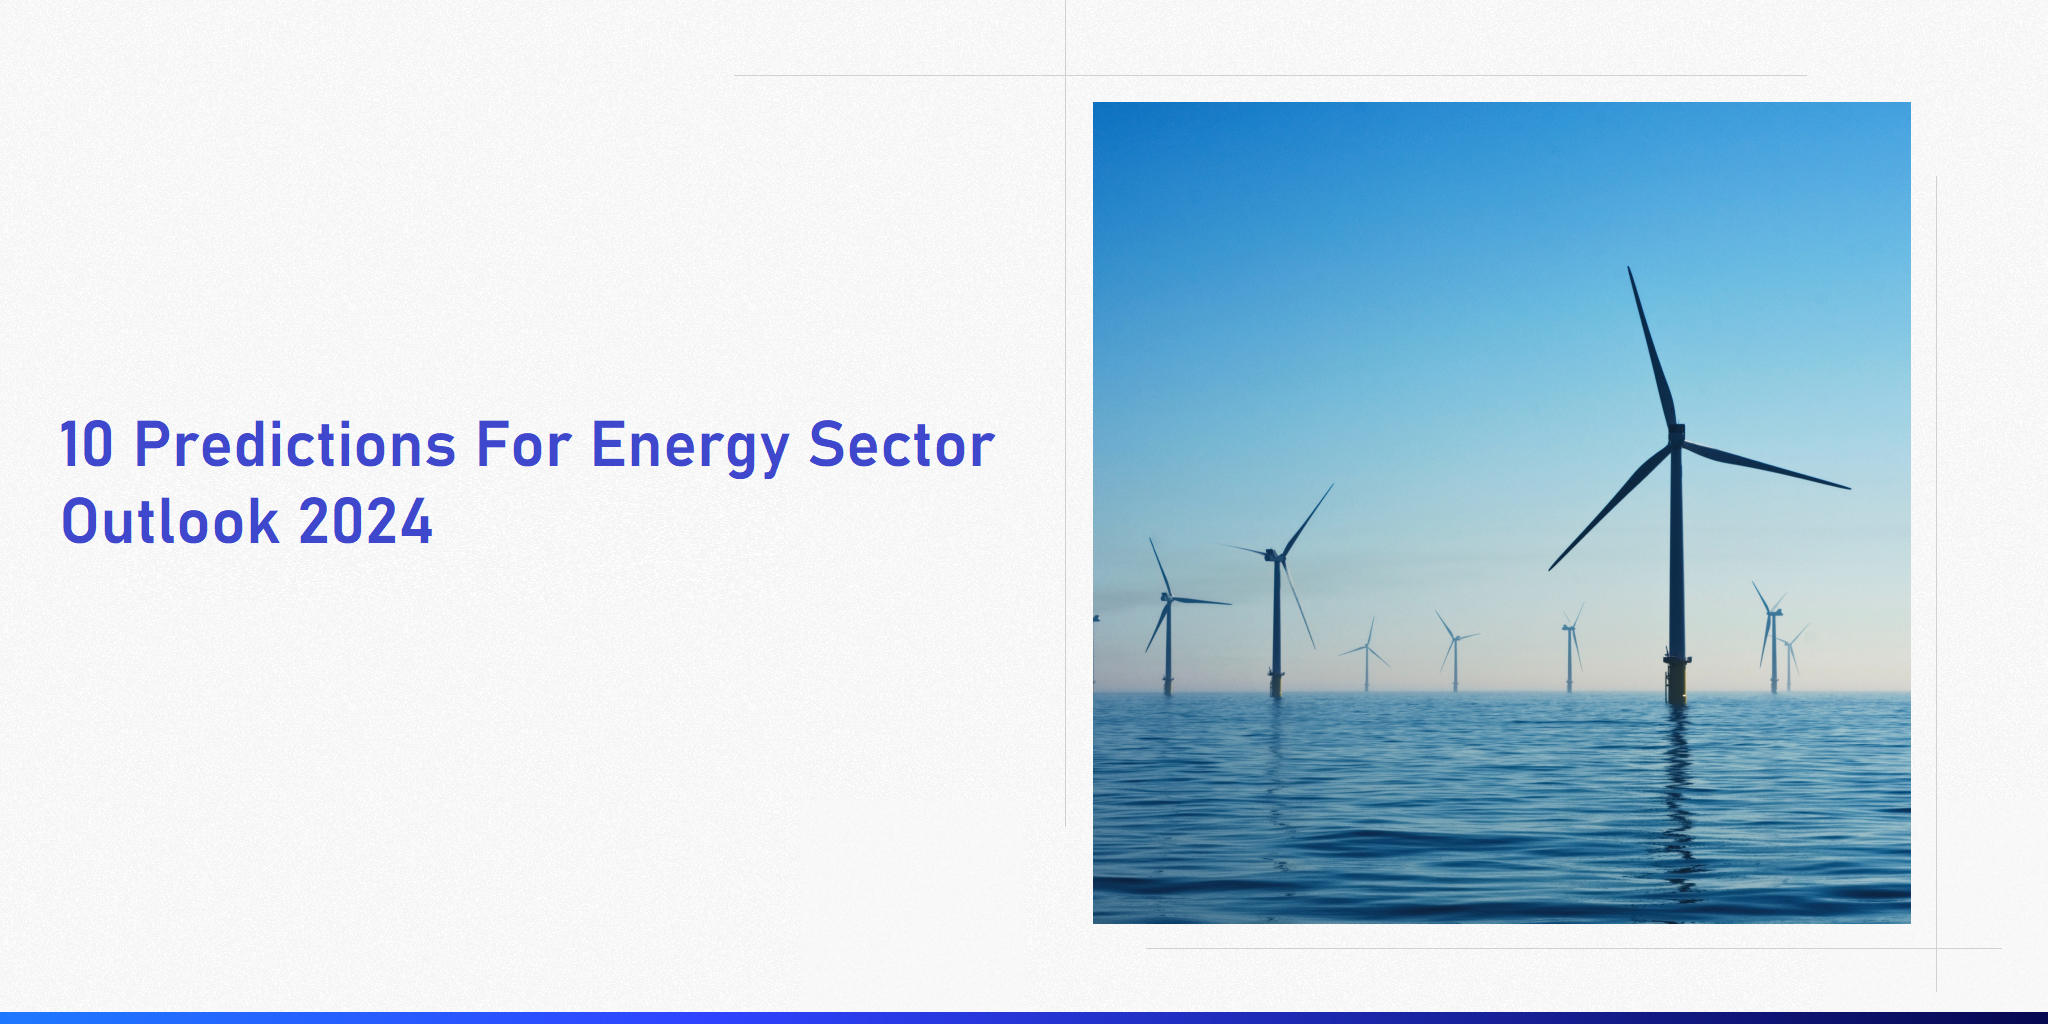 10 predictions for energy sector outlook 2024' written